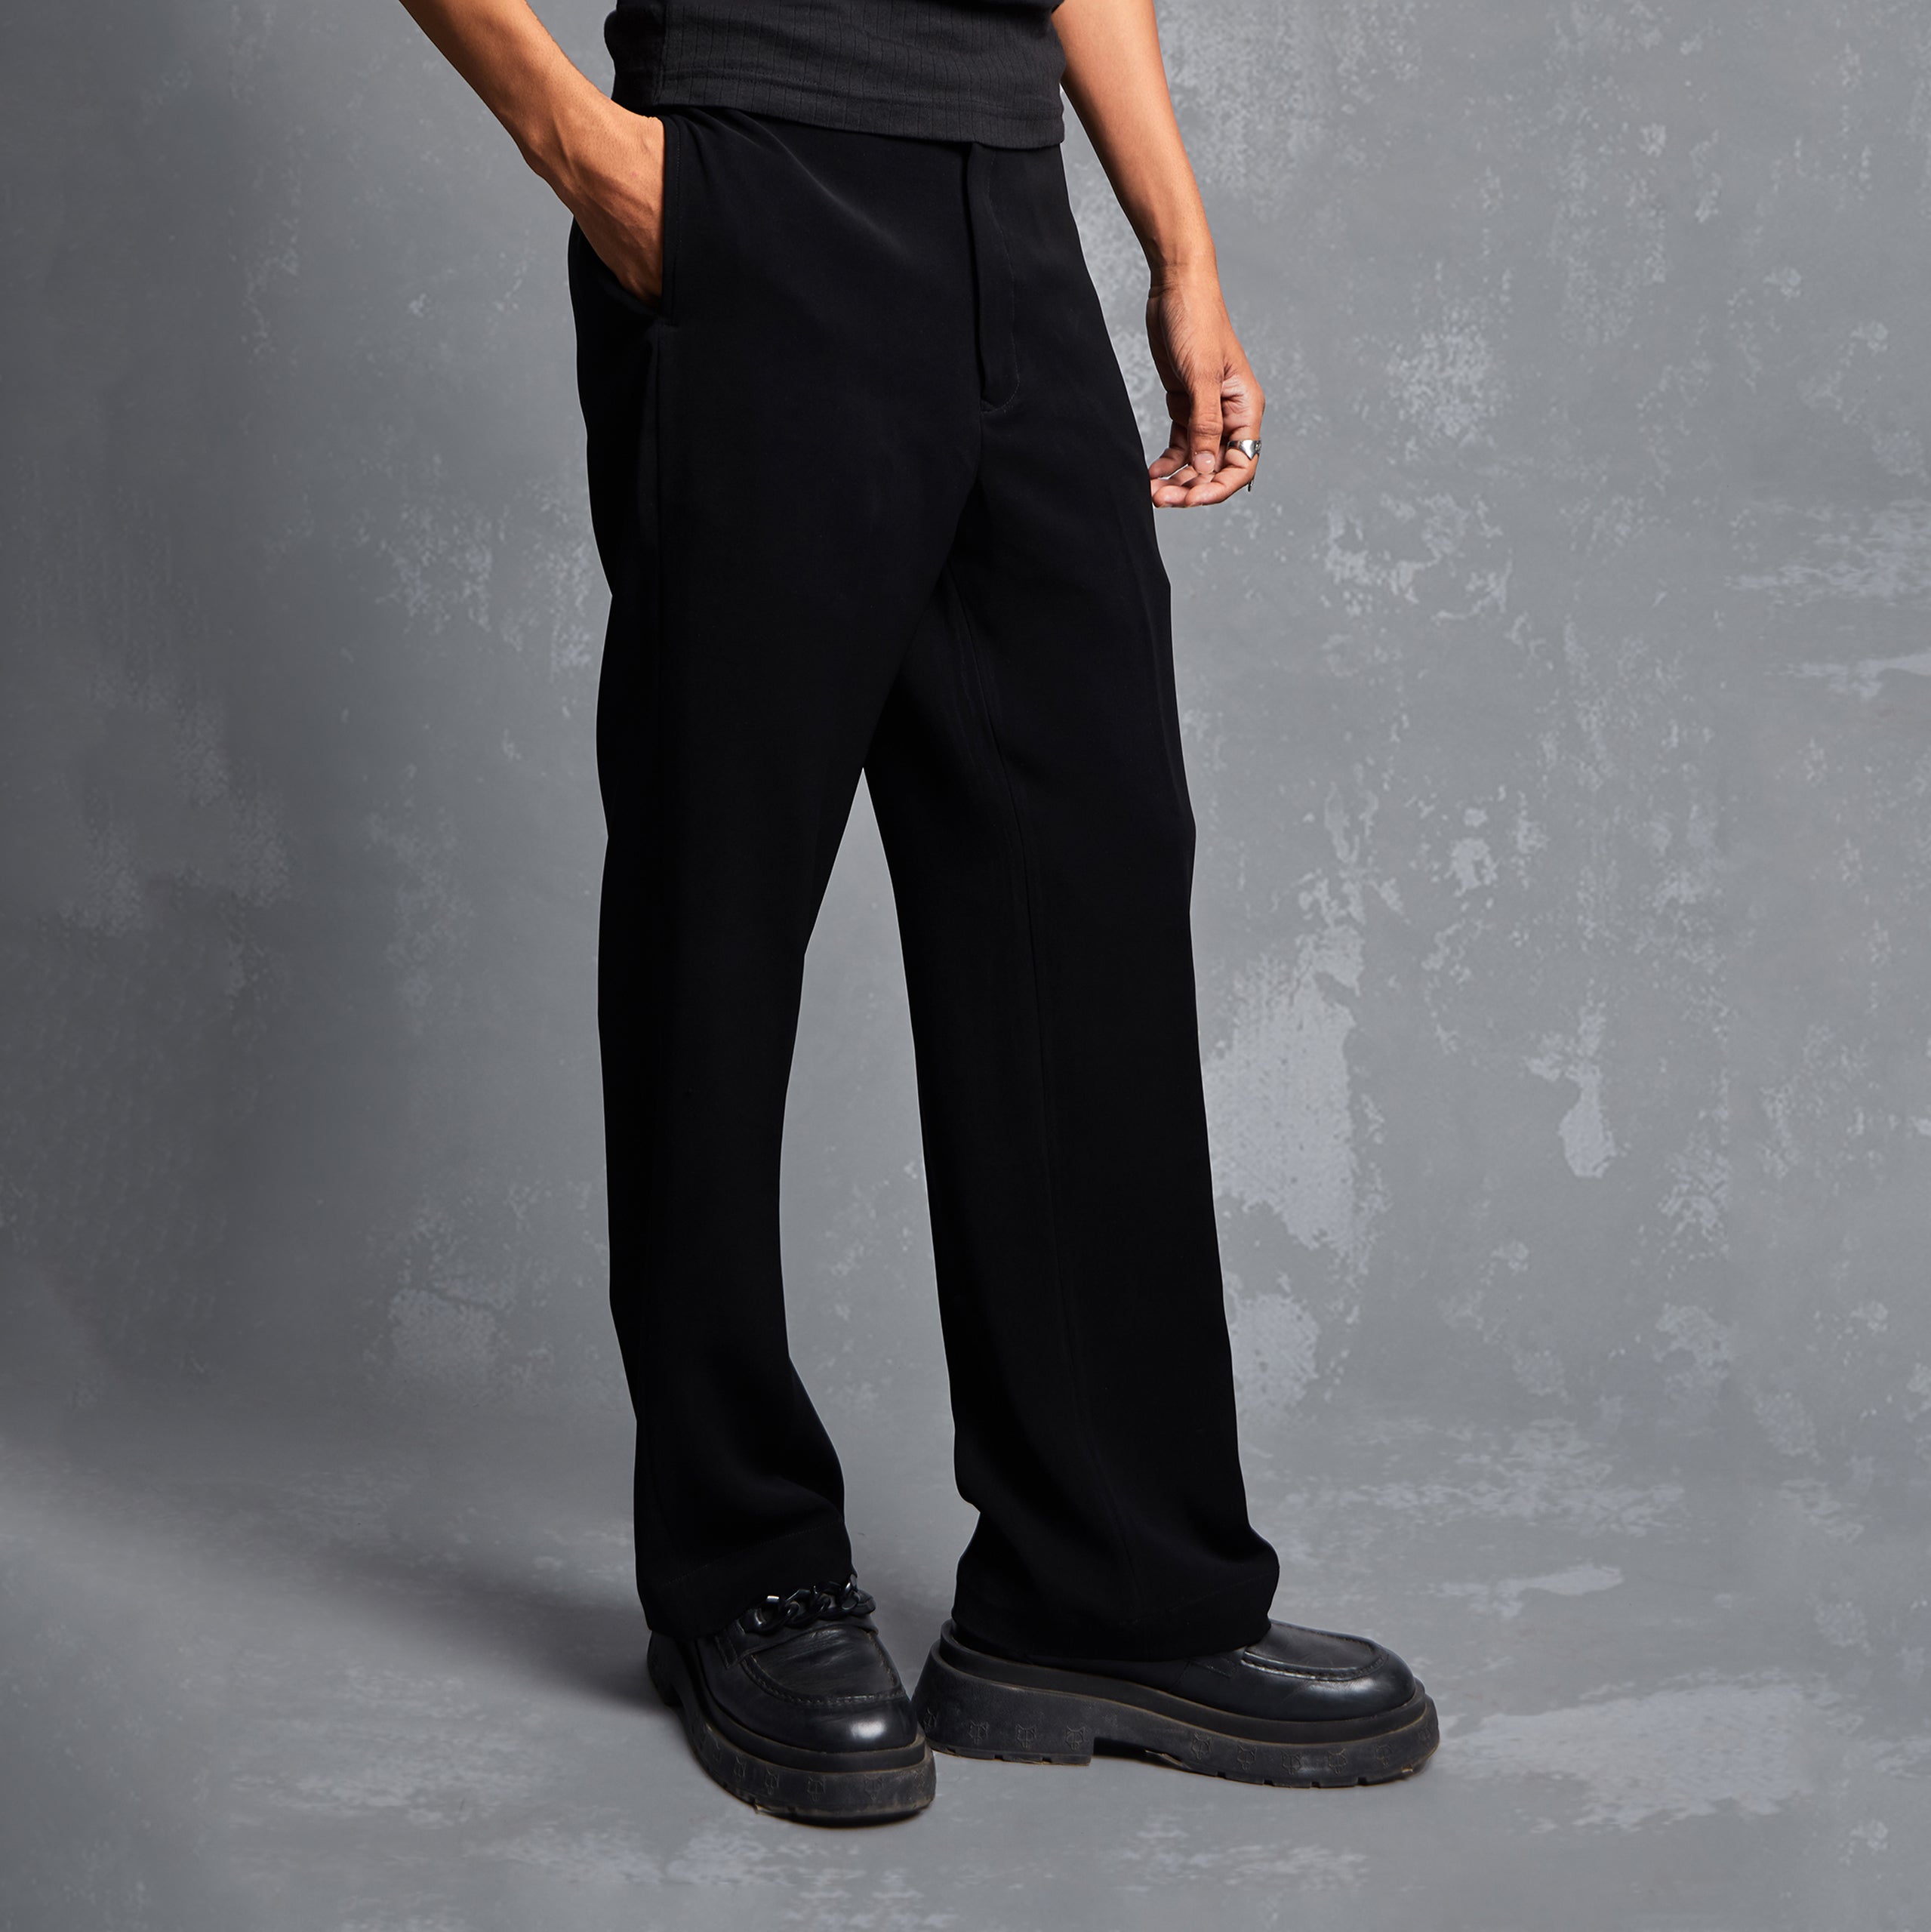 Seesa Trousers and Pants  Buy Seesa Jackie Straight Cut Black Trousers  Online  Nykaa Fashion